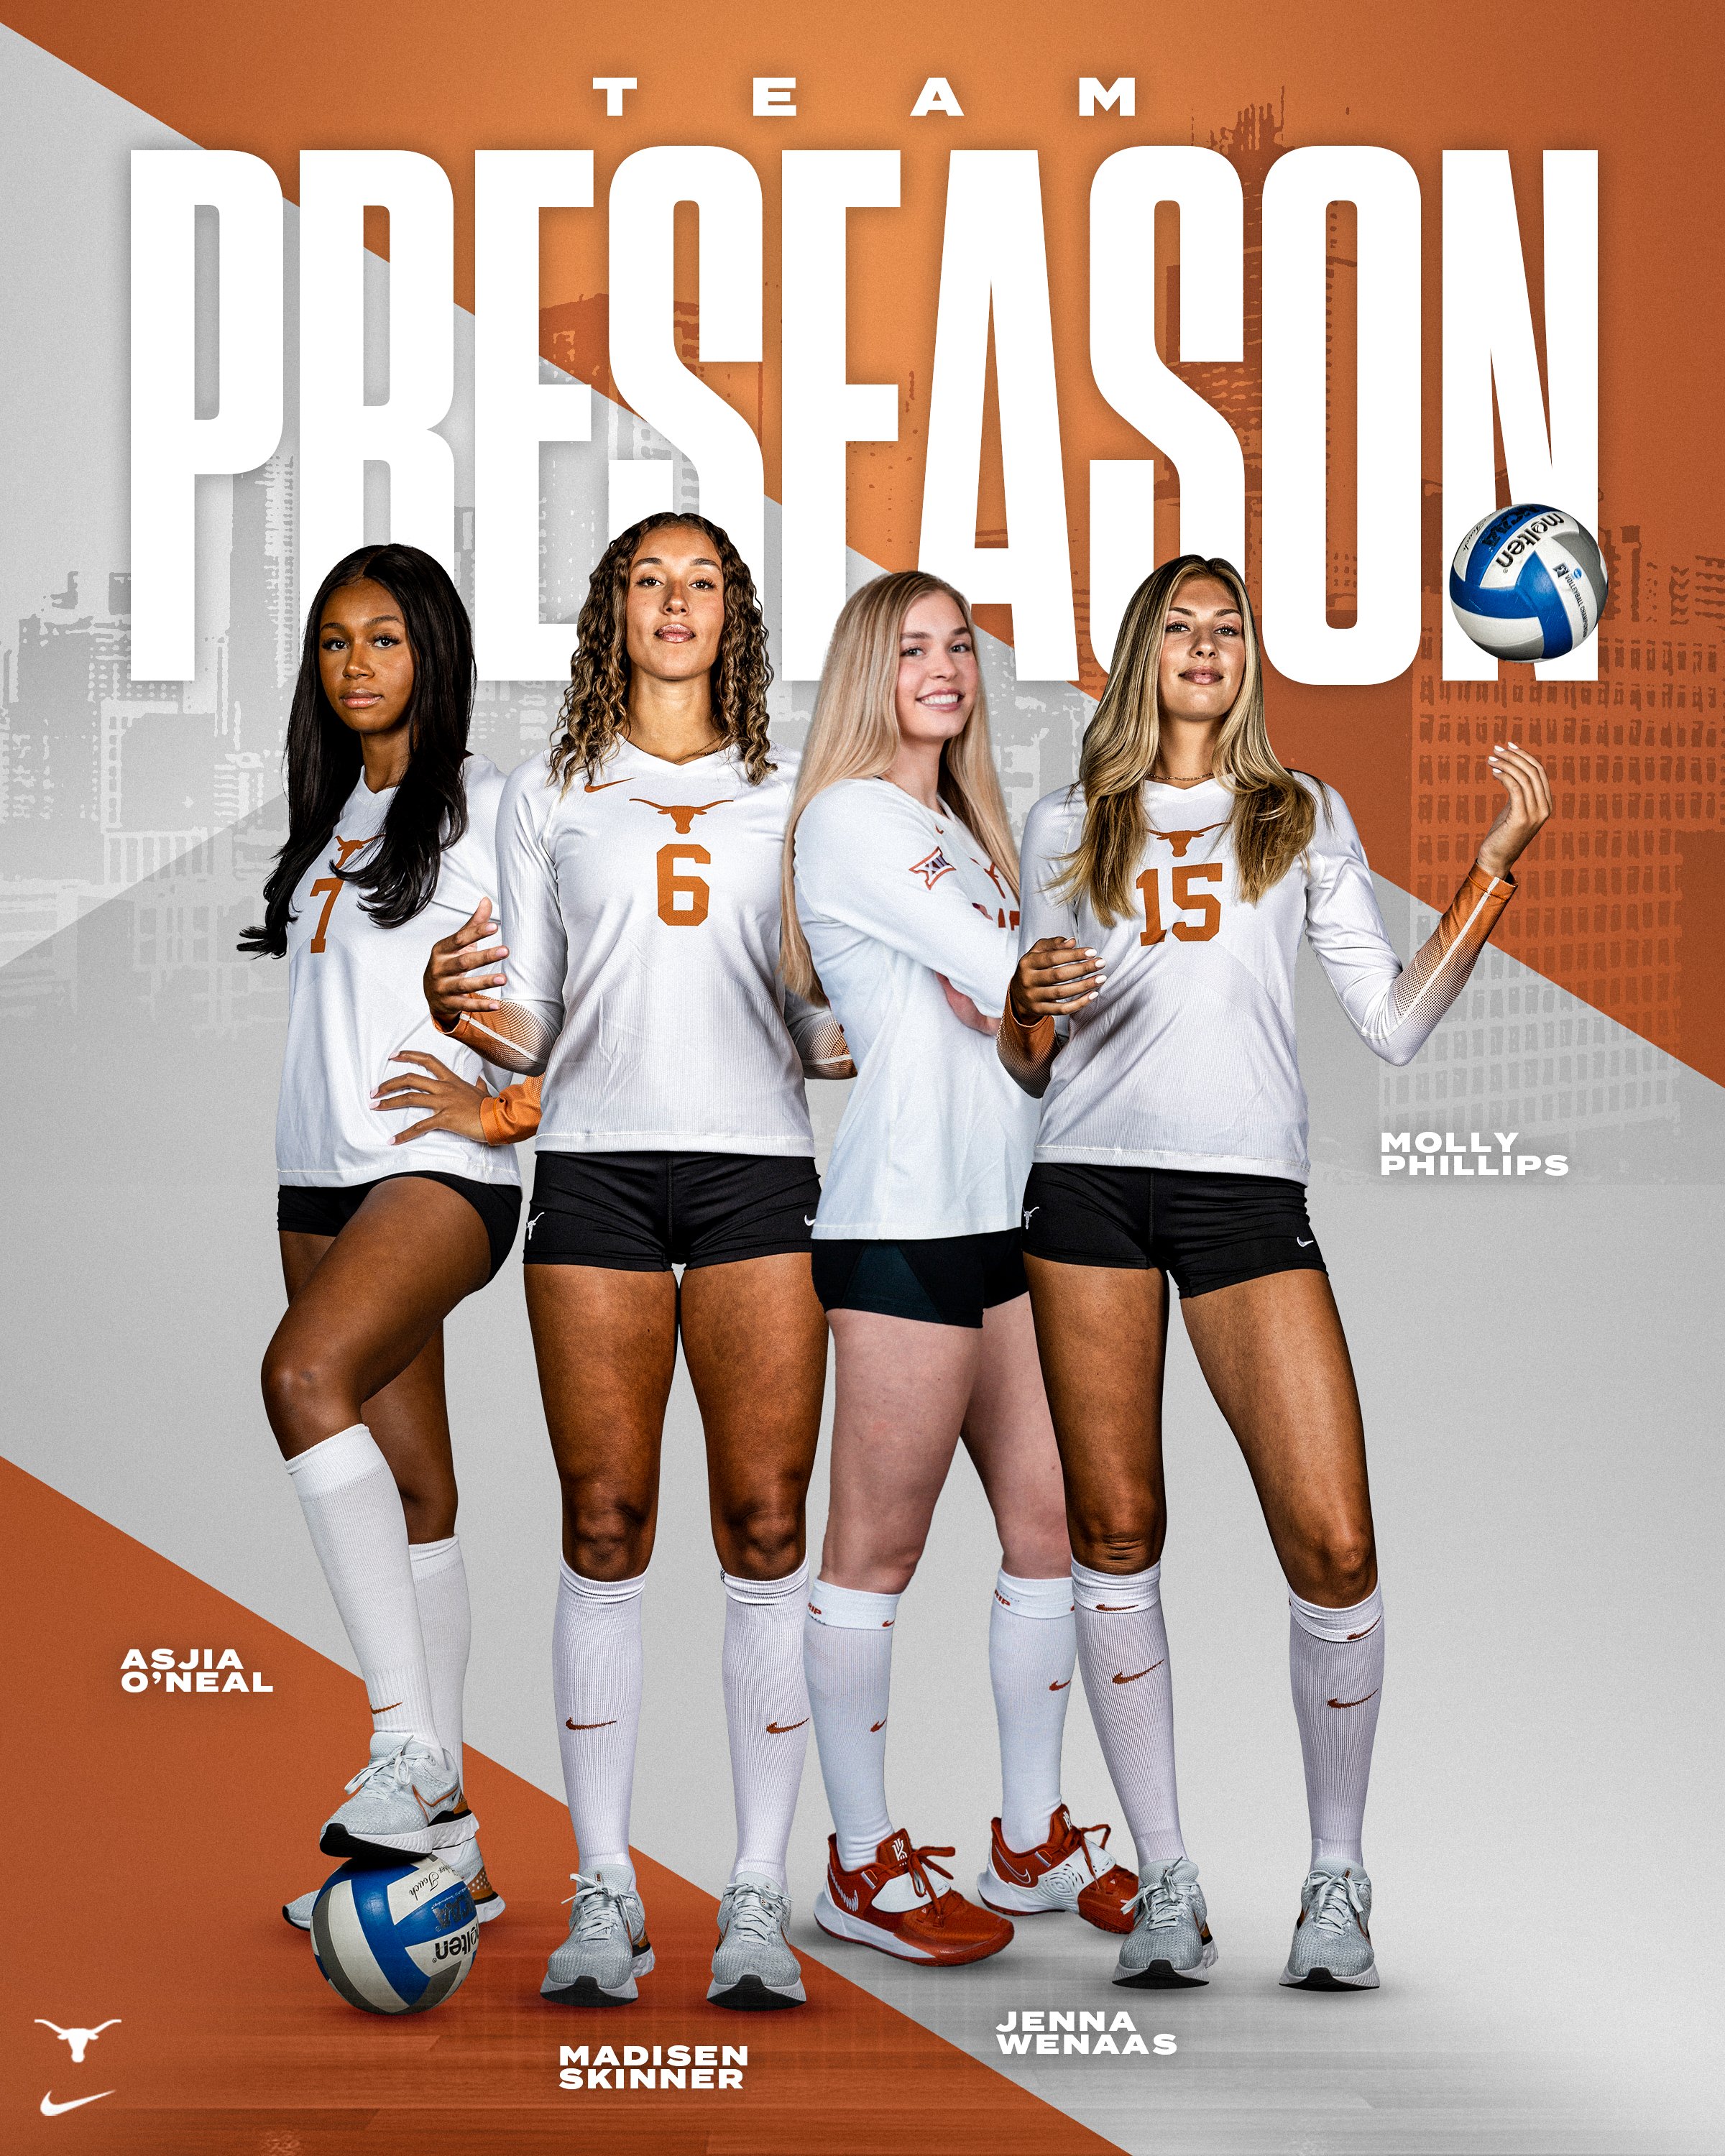 Texas Volleyball on Twitter "Leading the league with 4️⃣ on the